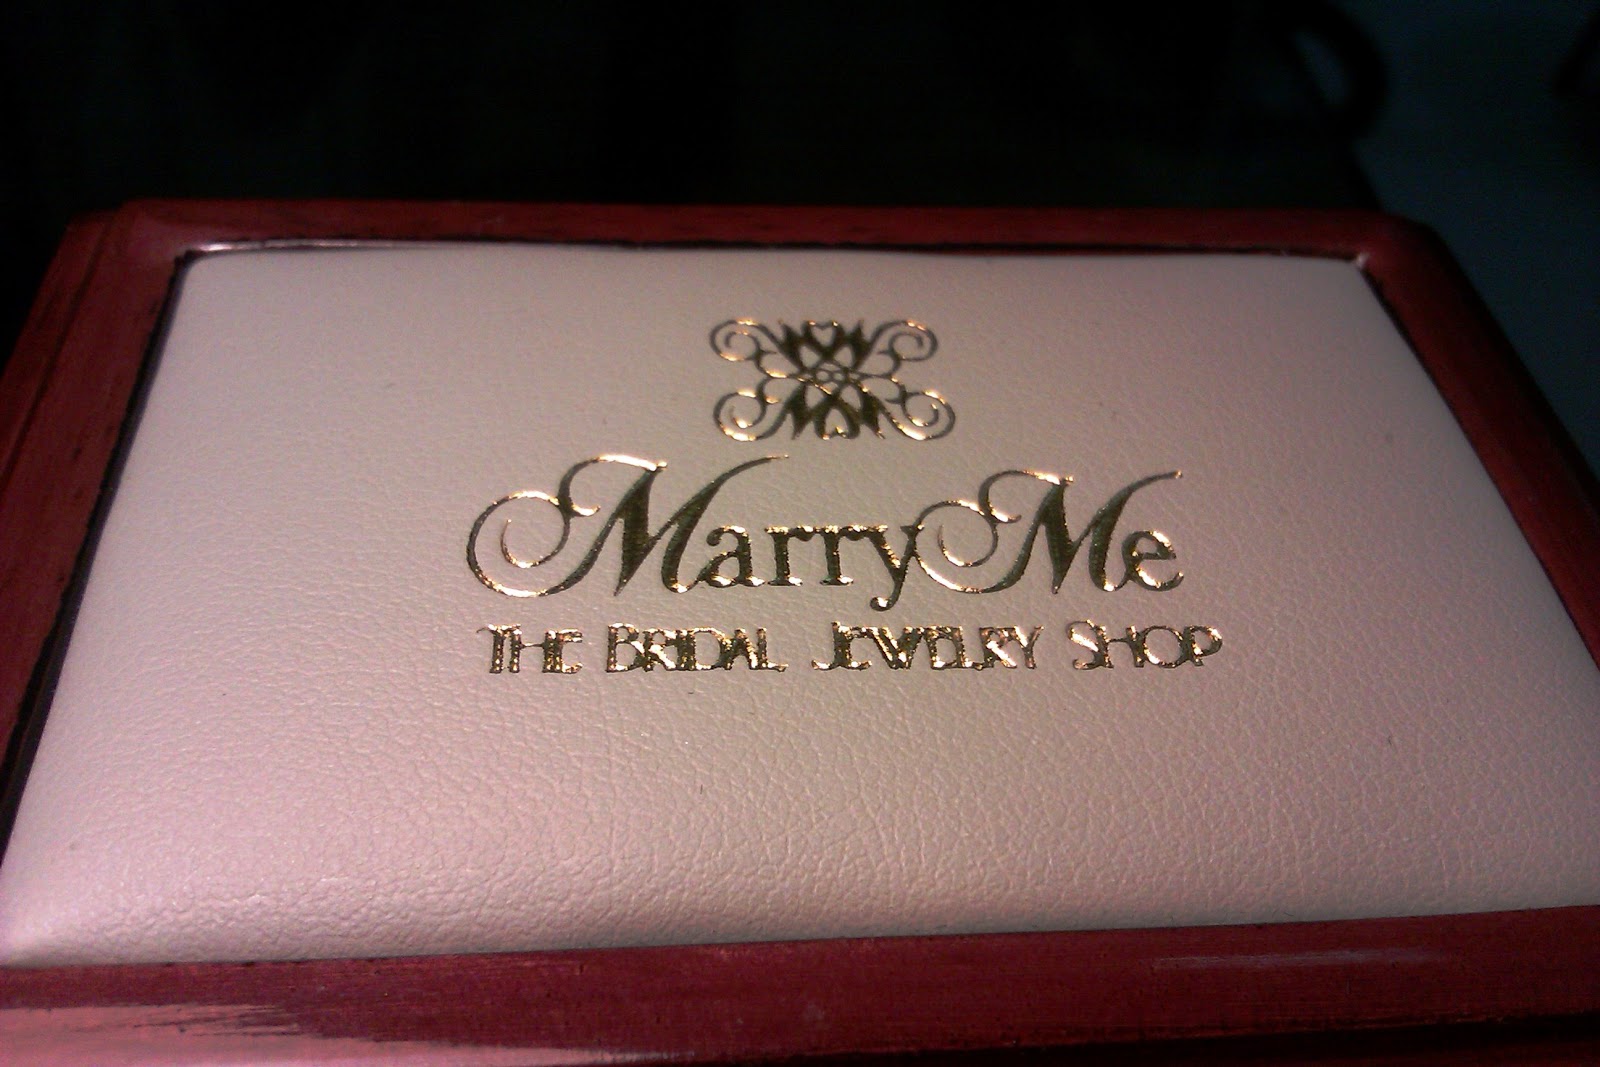 At last, we already claimed our wedding rings from Marry Me!